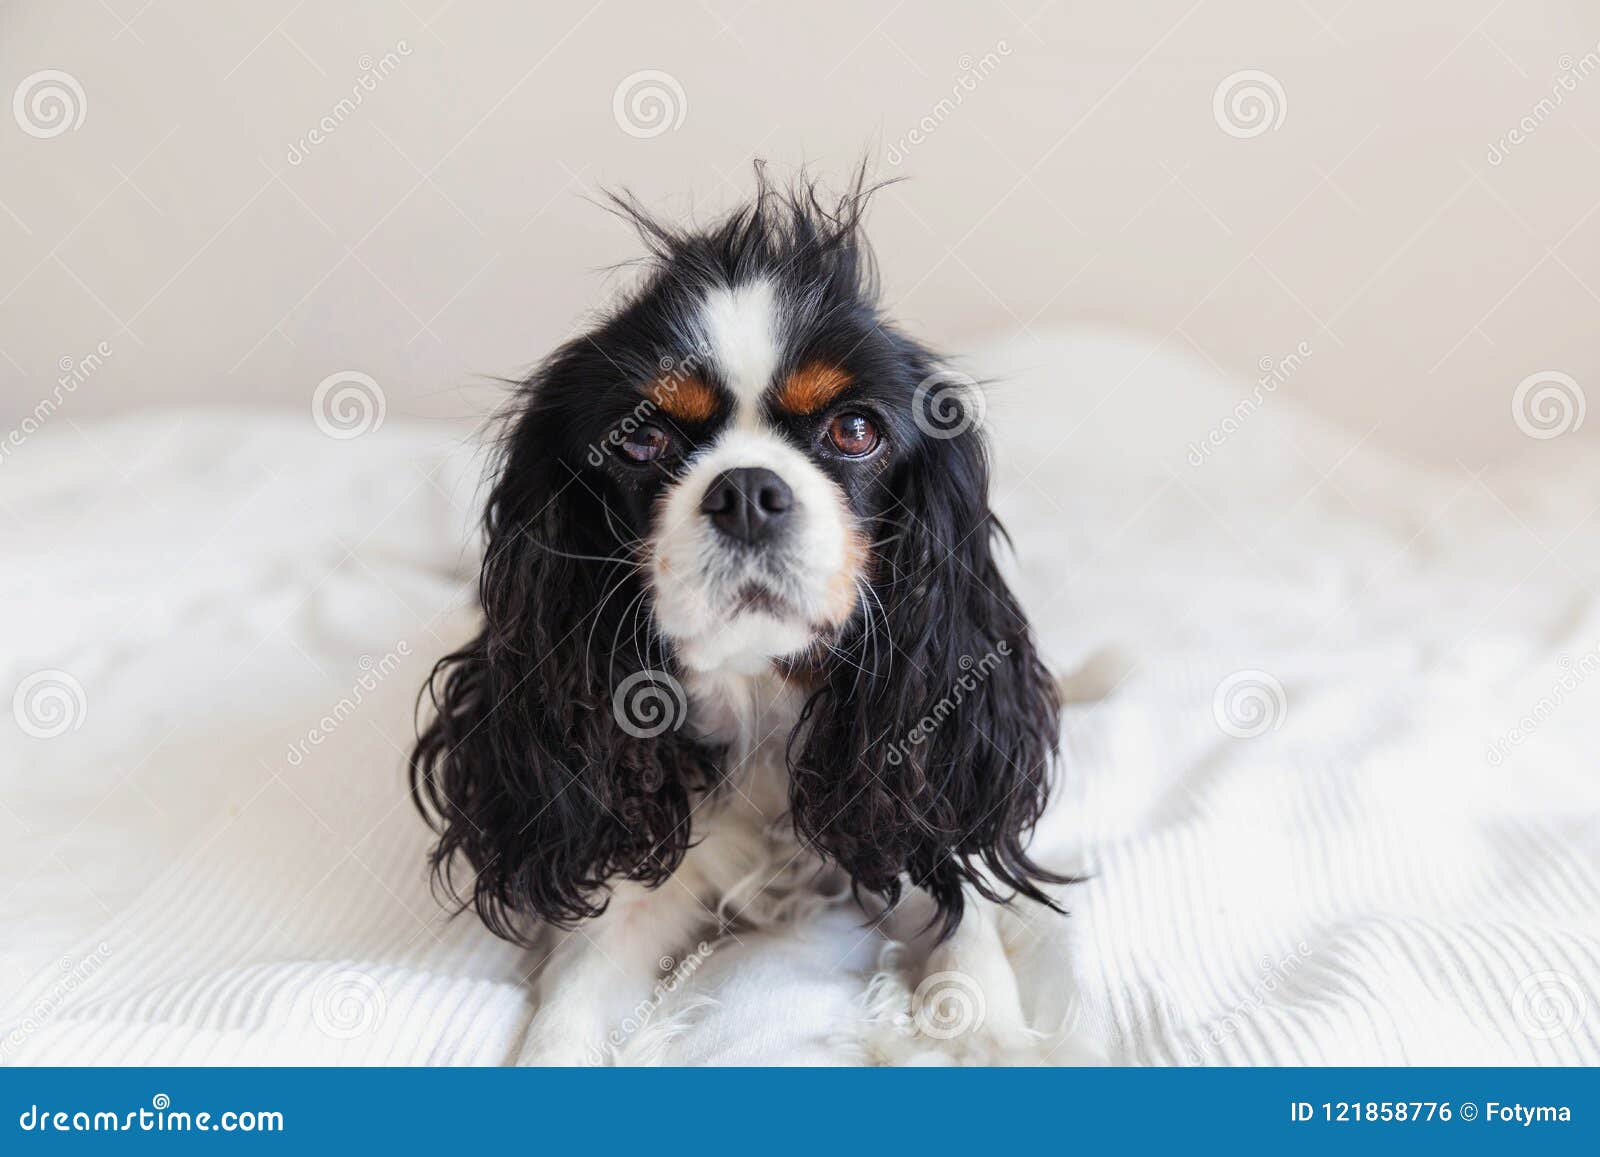 610 Messy Dog Hair Stock Photos - Free & Royalty-Free Stock Photos from  Dreamstime